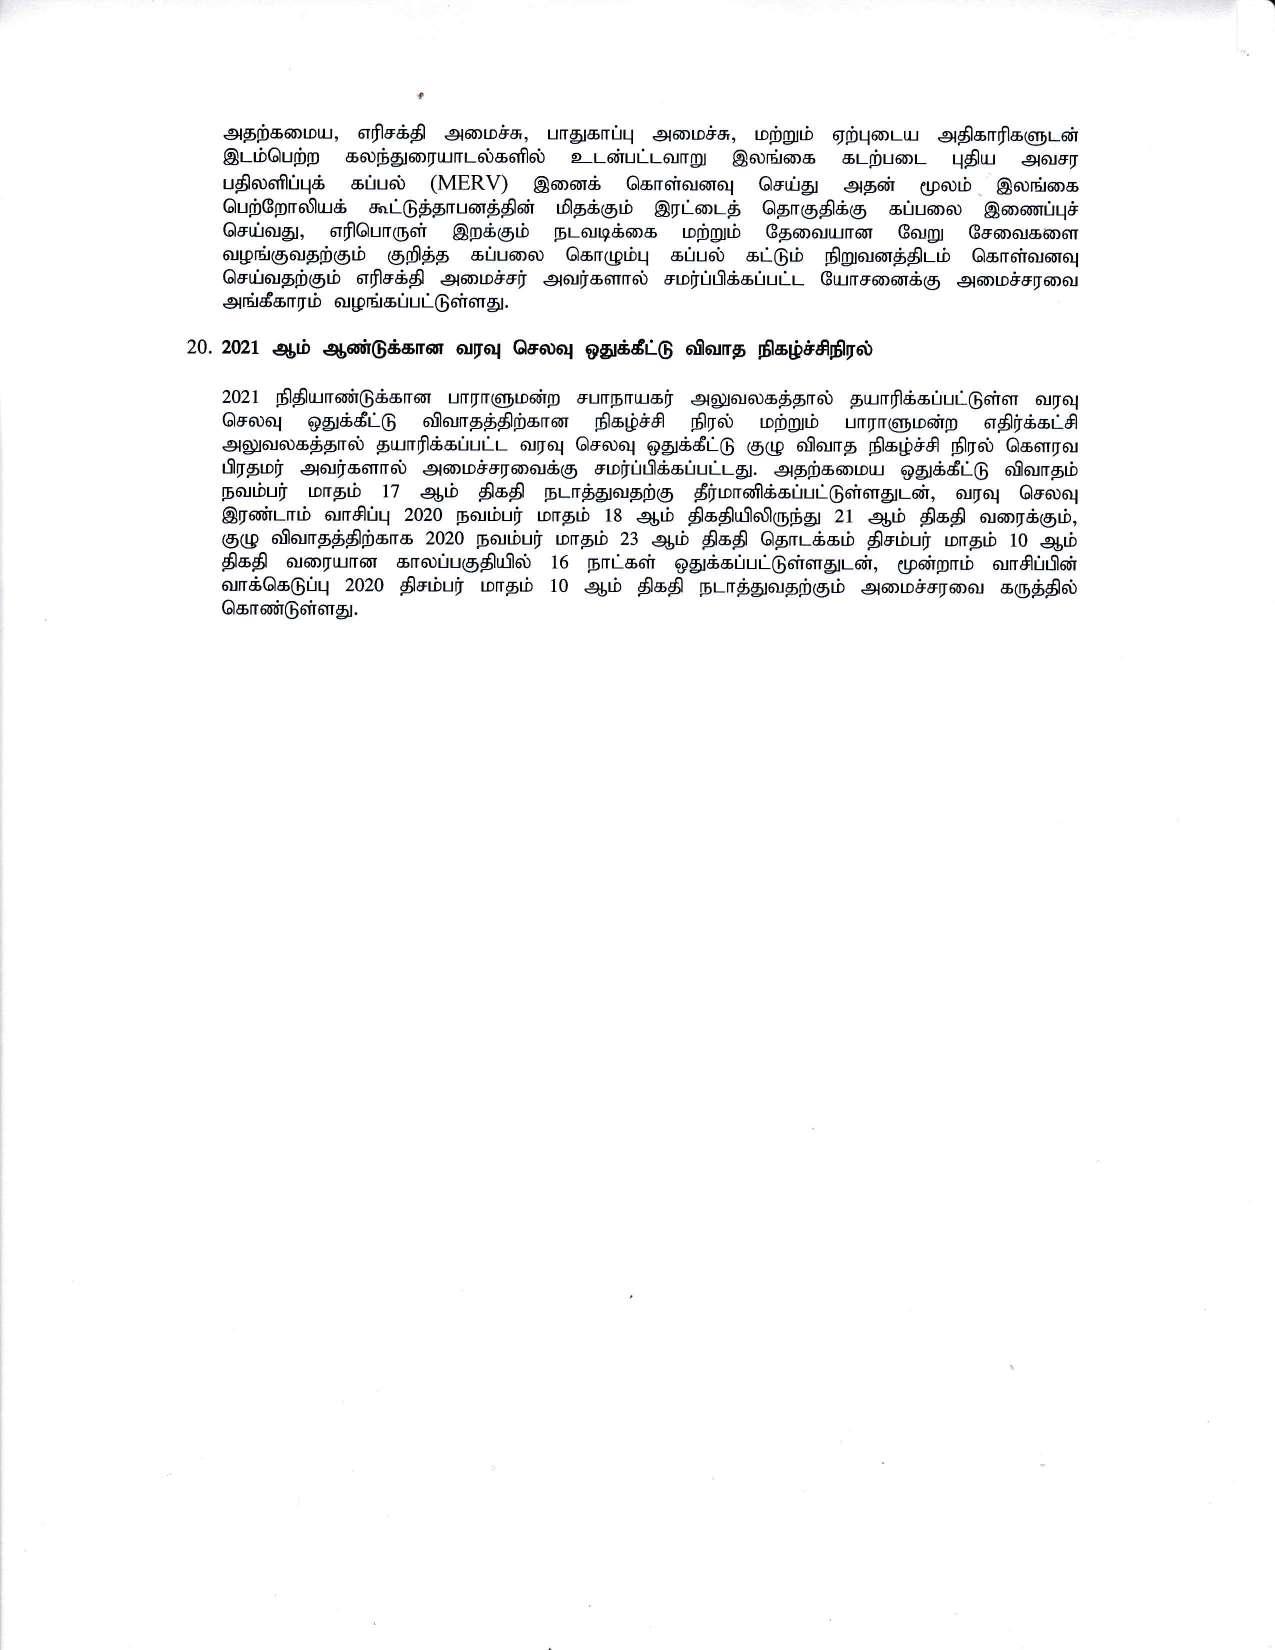 Cabinet Desion on 16.11.2020 Tamil page 007